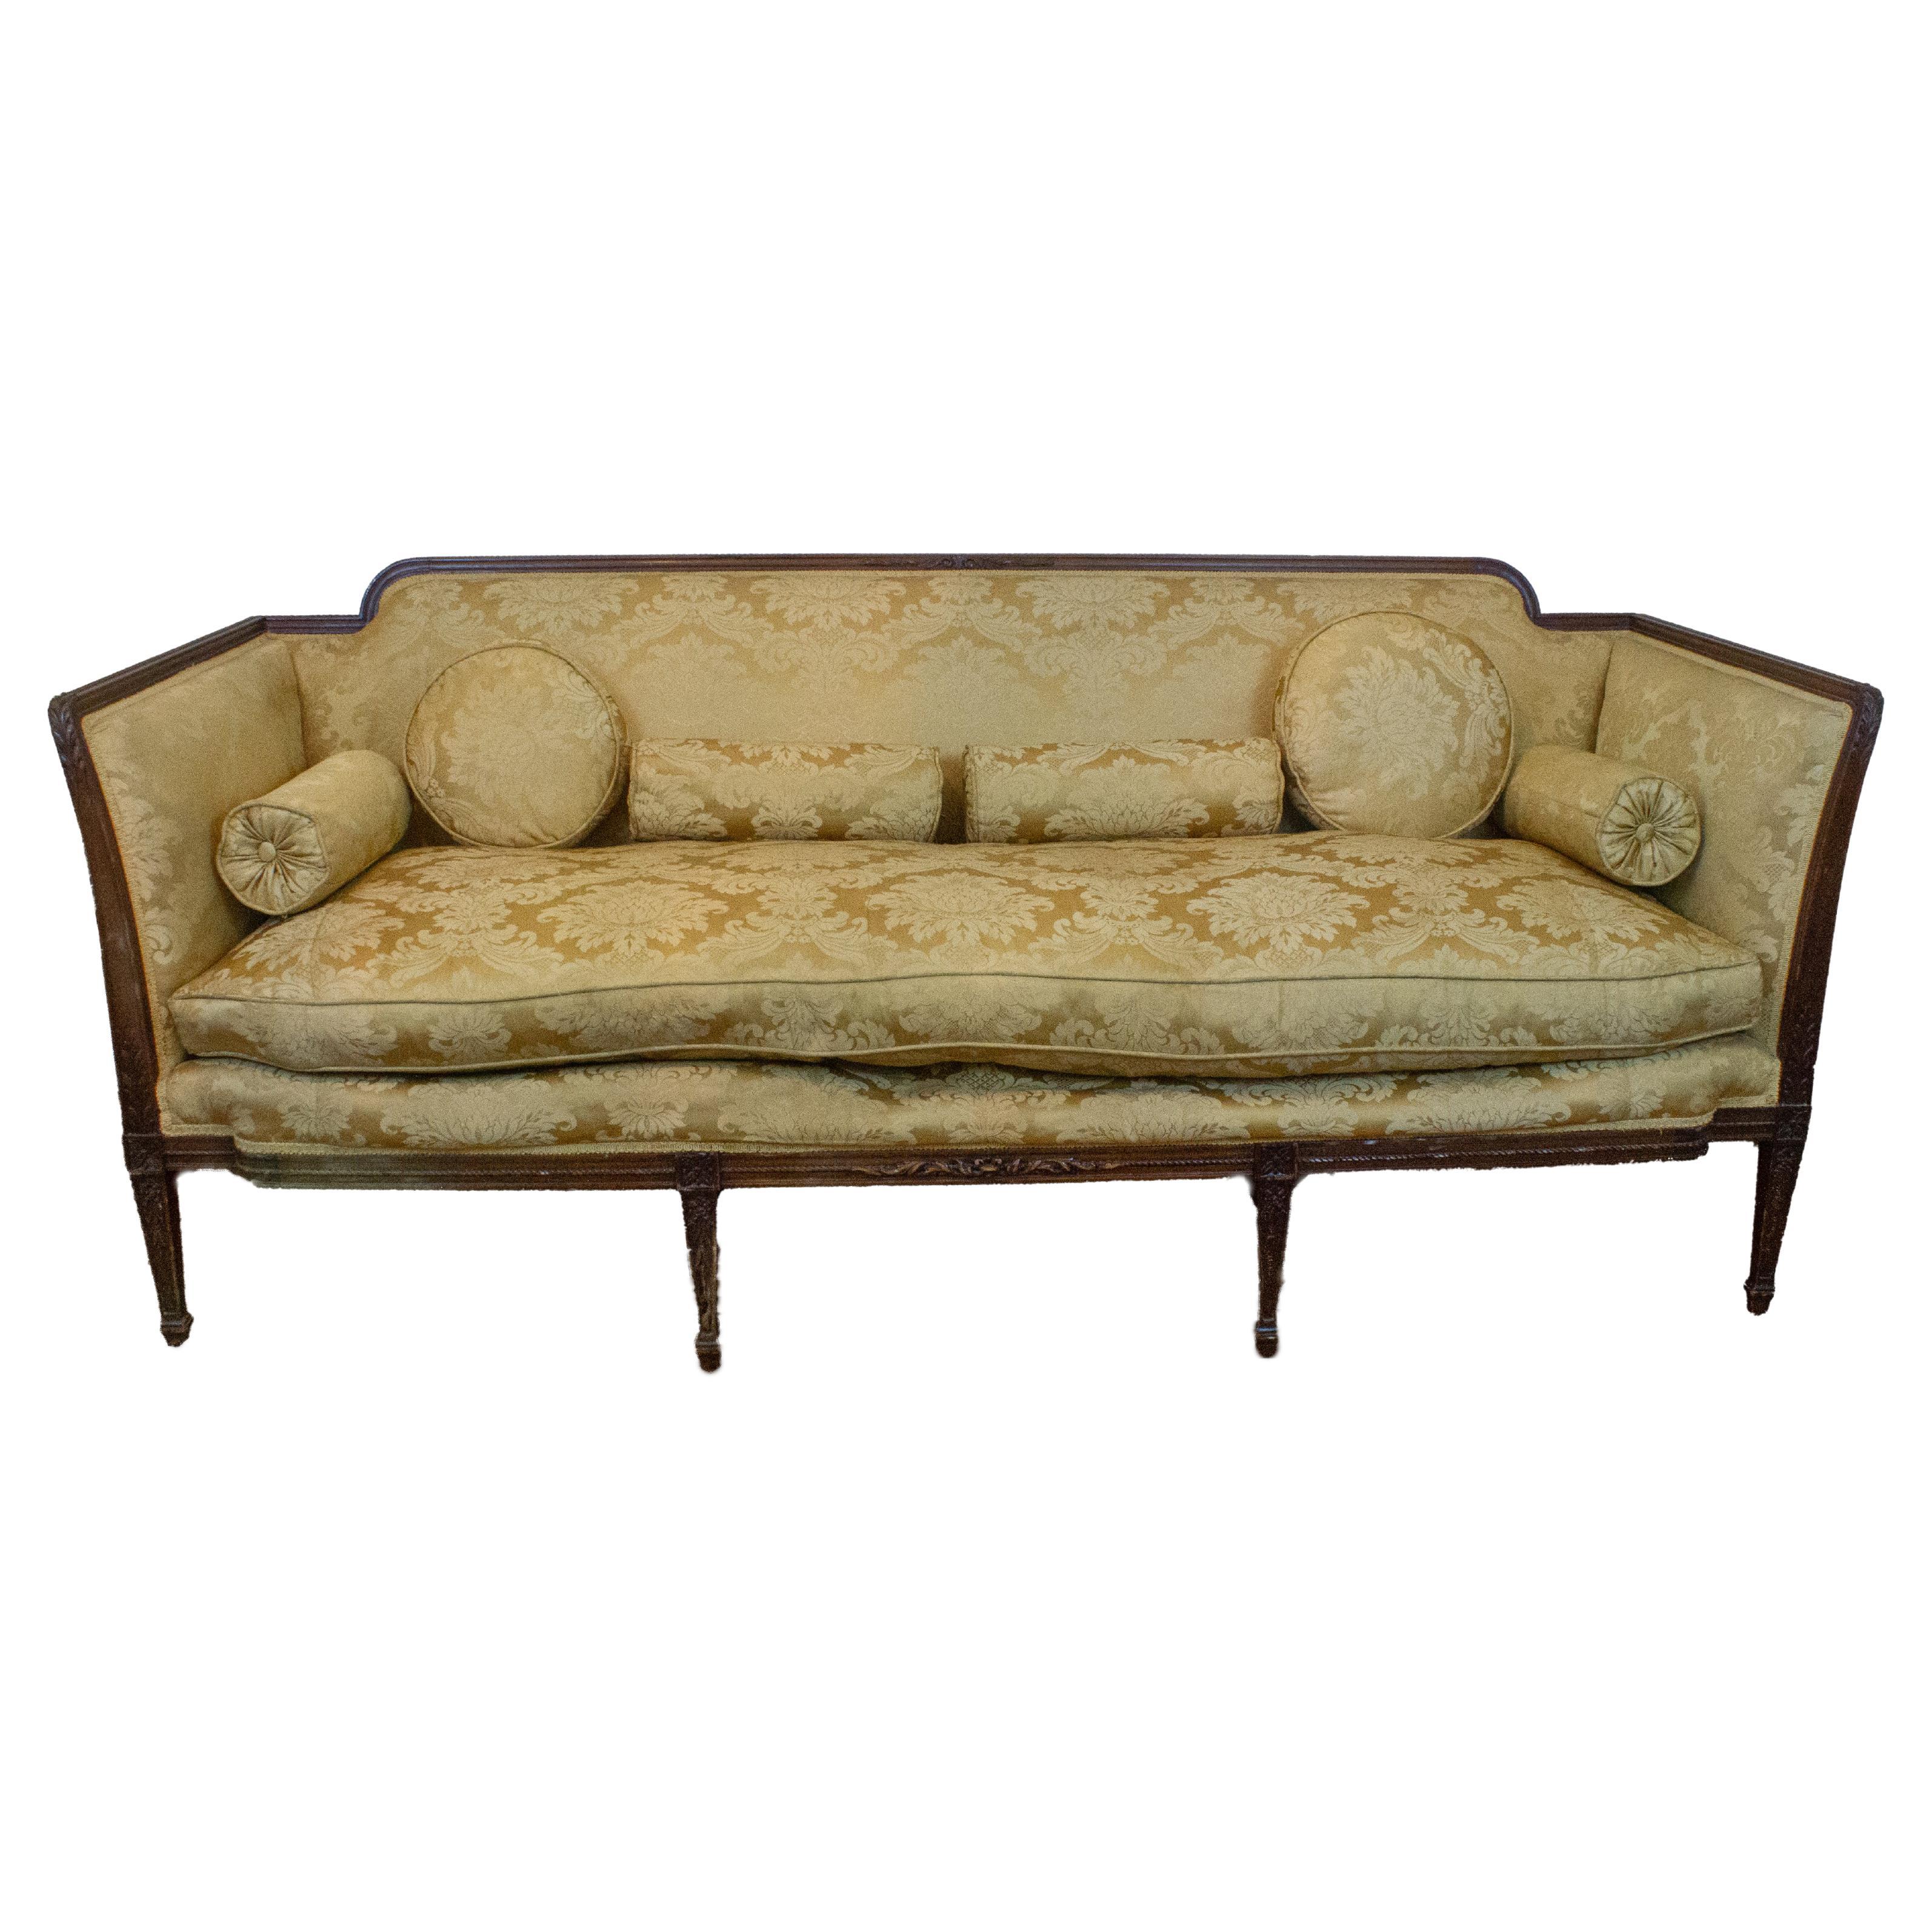 19th Century Regency Sofa with Gold Damask Upholstery and Carved Mahogany